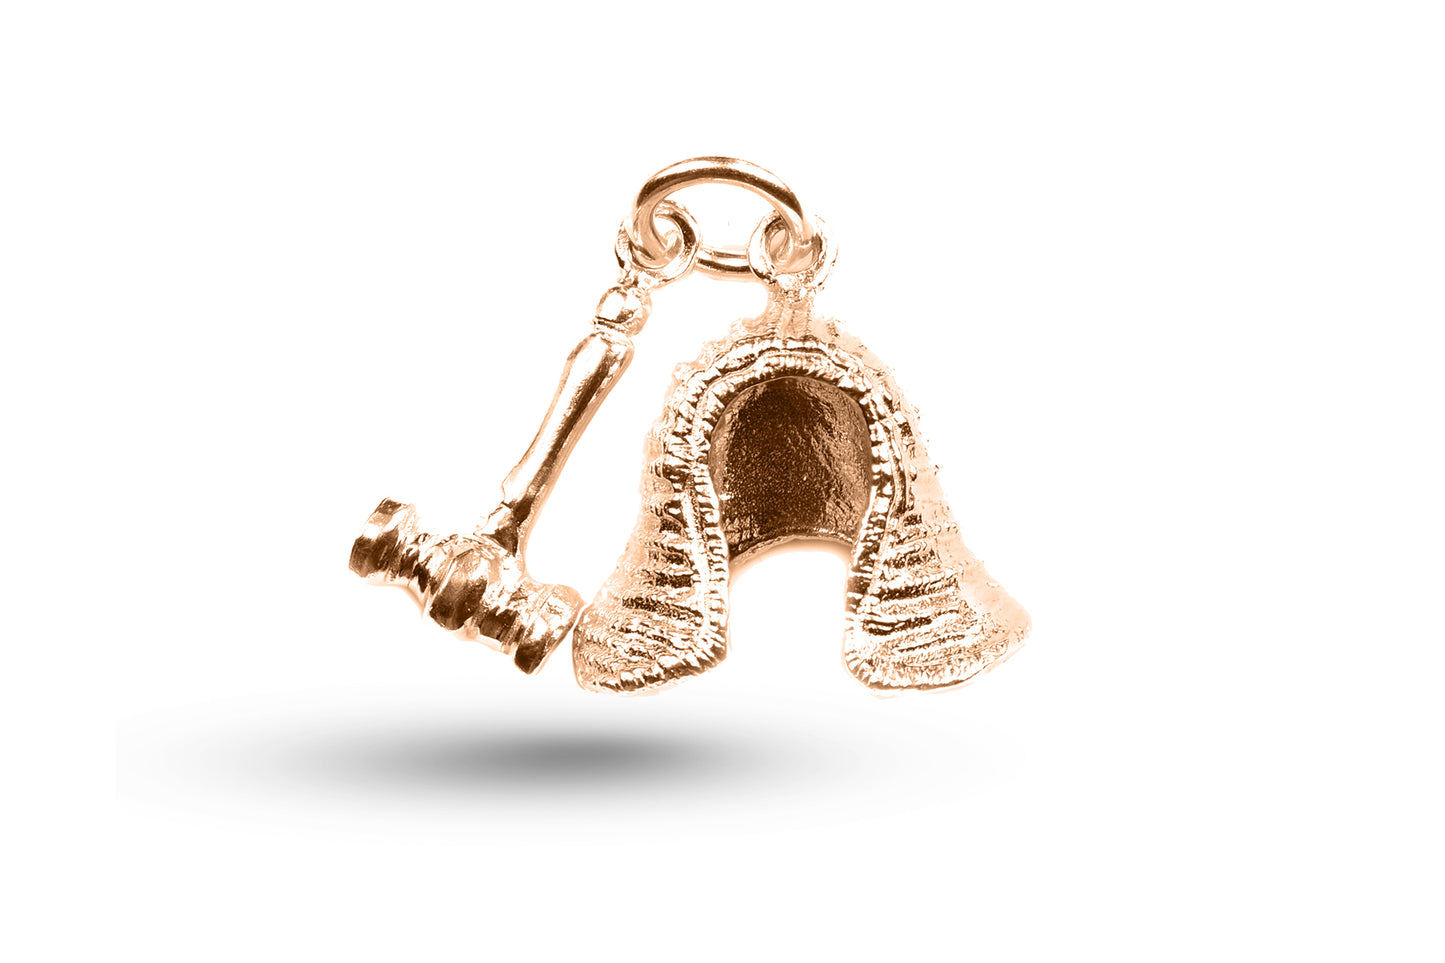 Rose gold Judges Wig and Gavel charm.